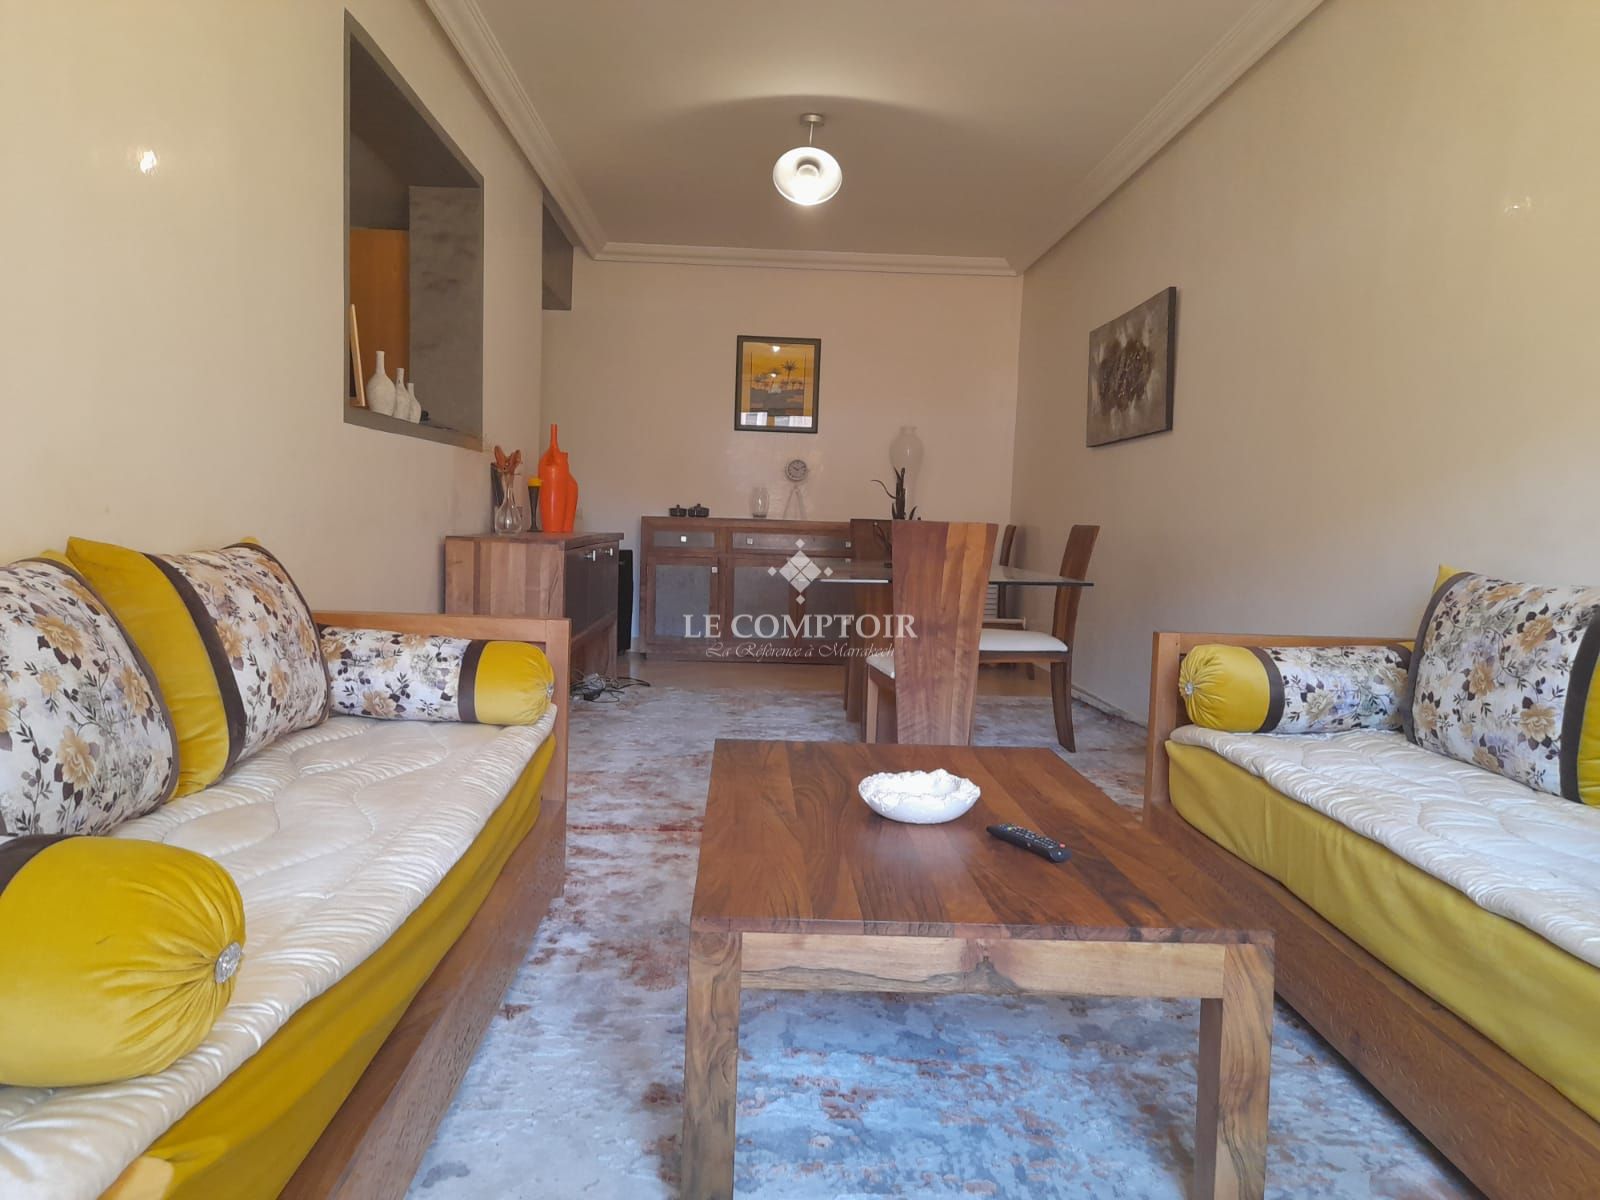 Le Comptoir Immobilier Agence Immobiliere Marrakech Location Appartement Gueliz Residence 5